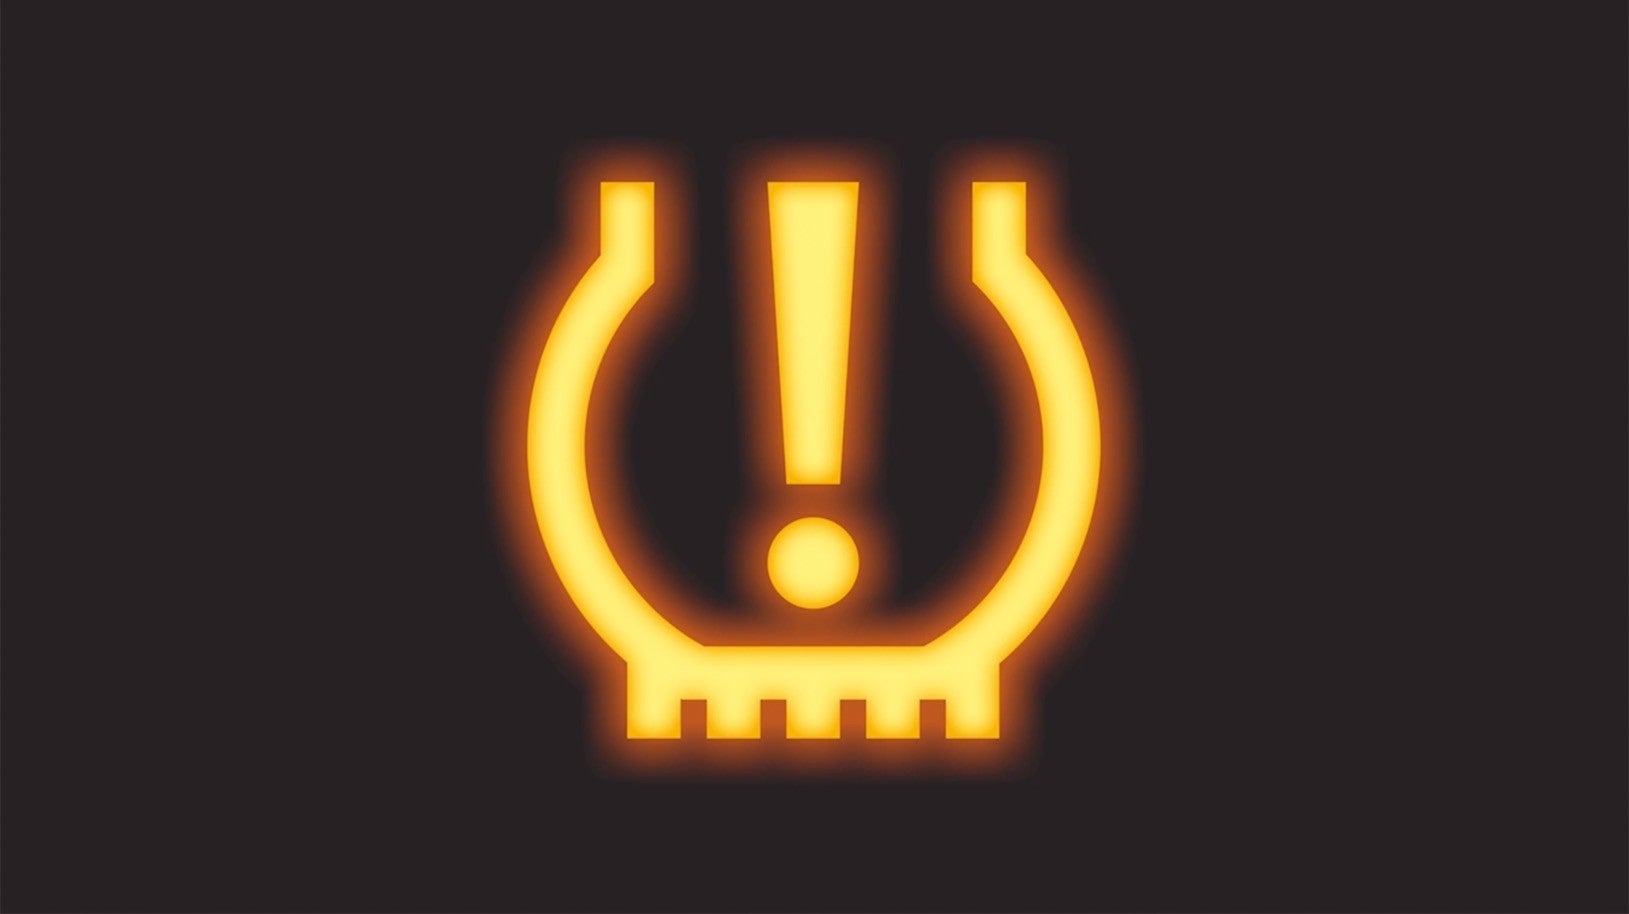  Image of the Tire Pressure Monitoring System Light | Subaru Superstore of Chandler in Chandler AZ